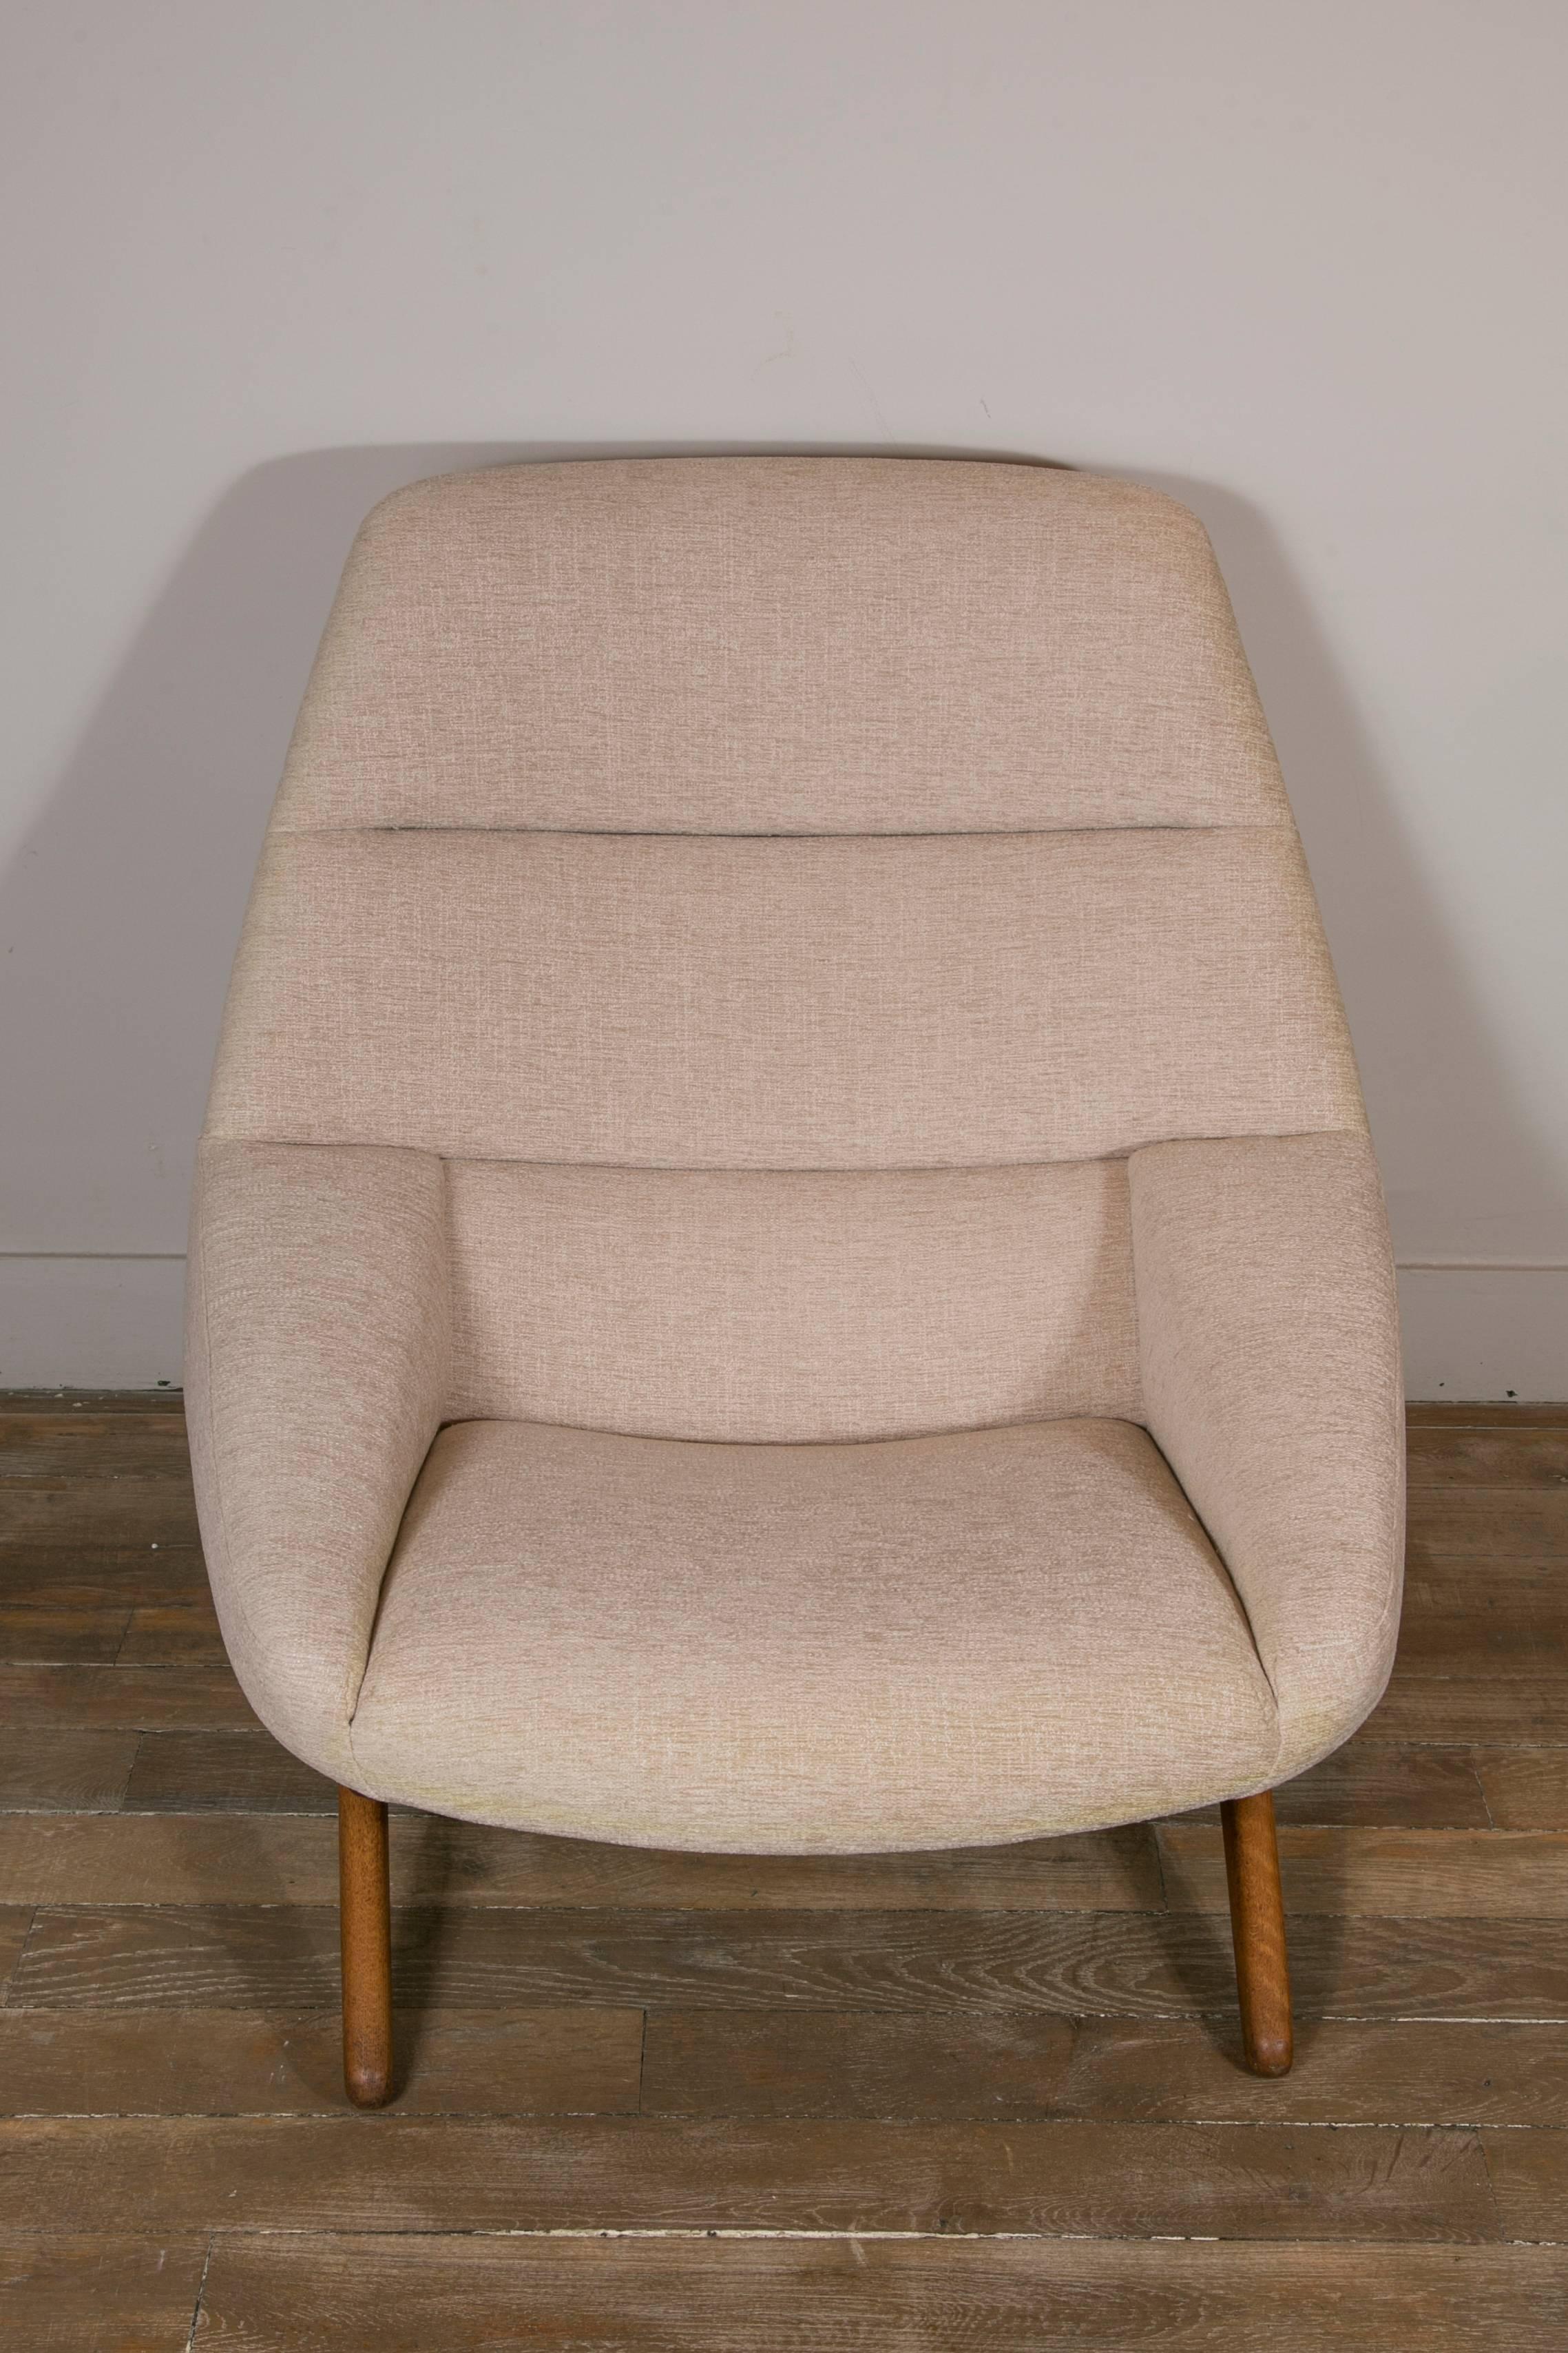 Rare oak lounge chair and ottoman, model ML-91
Designed by Illum Wikkelso for Mikael Laursen,
Denmark, 1960.
Professionally re upholstered with ivory velvet 

Measure chair: 
H 87 cm (34.3 in.)
W 87 cm (34.3 in.)
D 95 cm (37.4 in.)
H seat